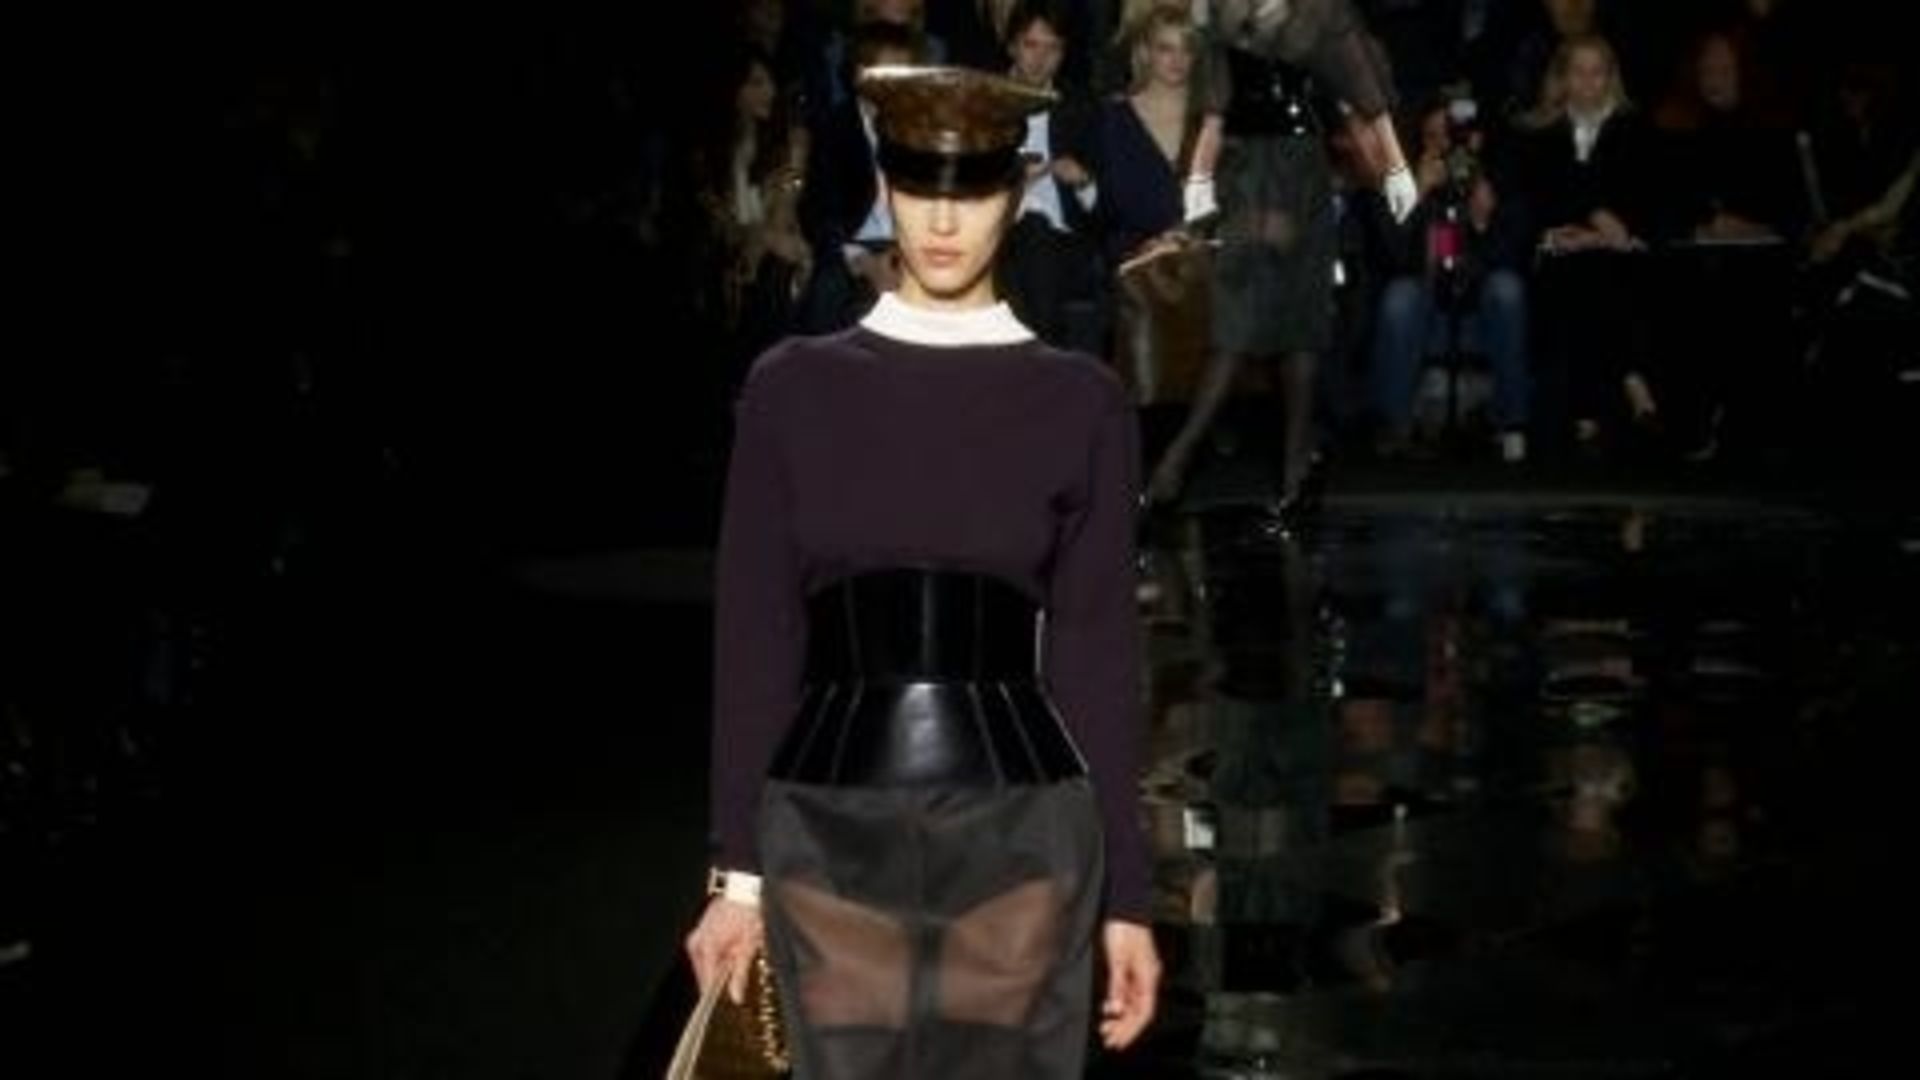 LOUIS VUITTON fall 2011-12 SHOES + BAGS from the PARIS RUNWAY - Fashion  Daily Mag